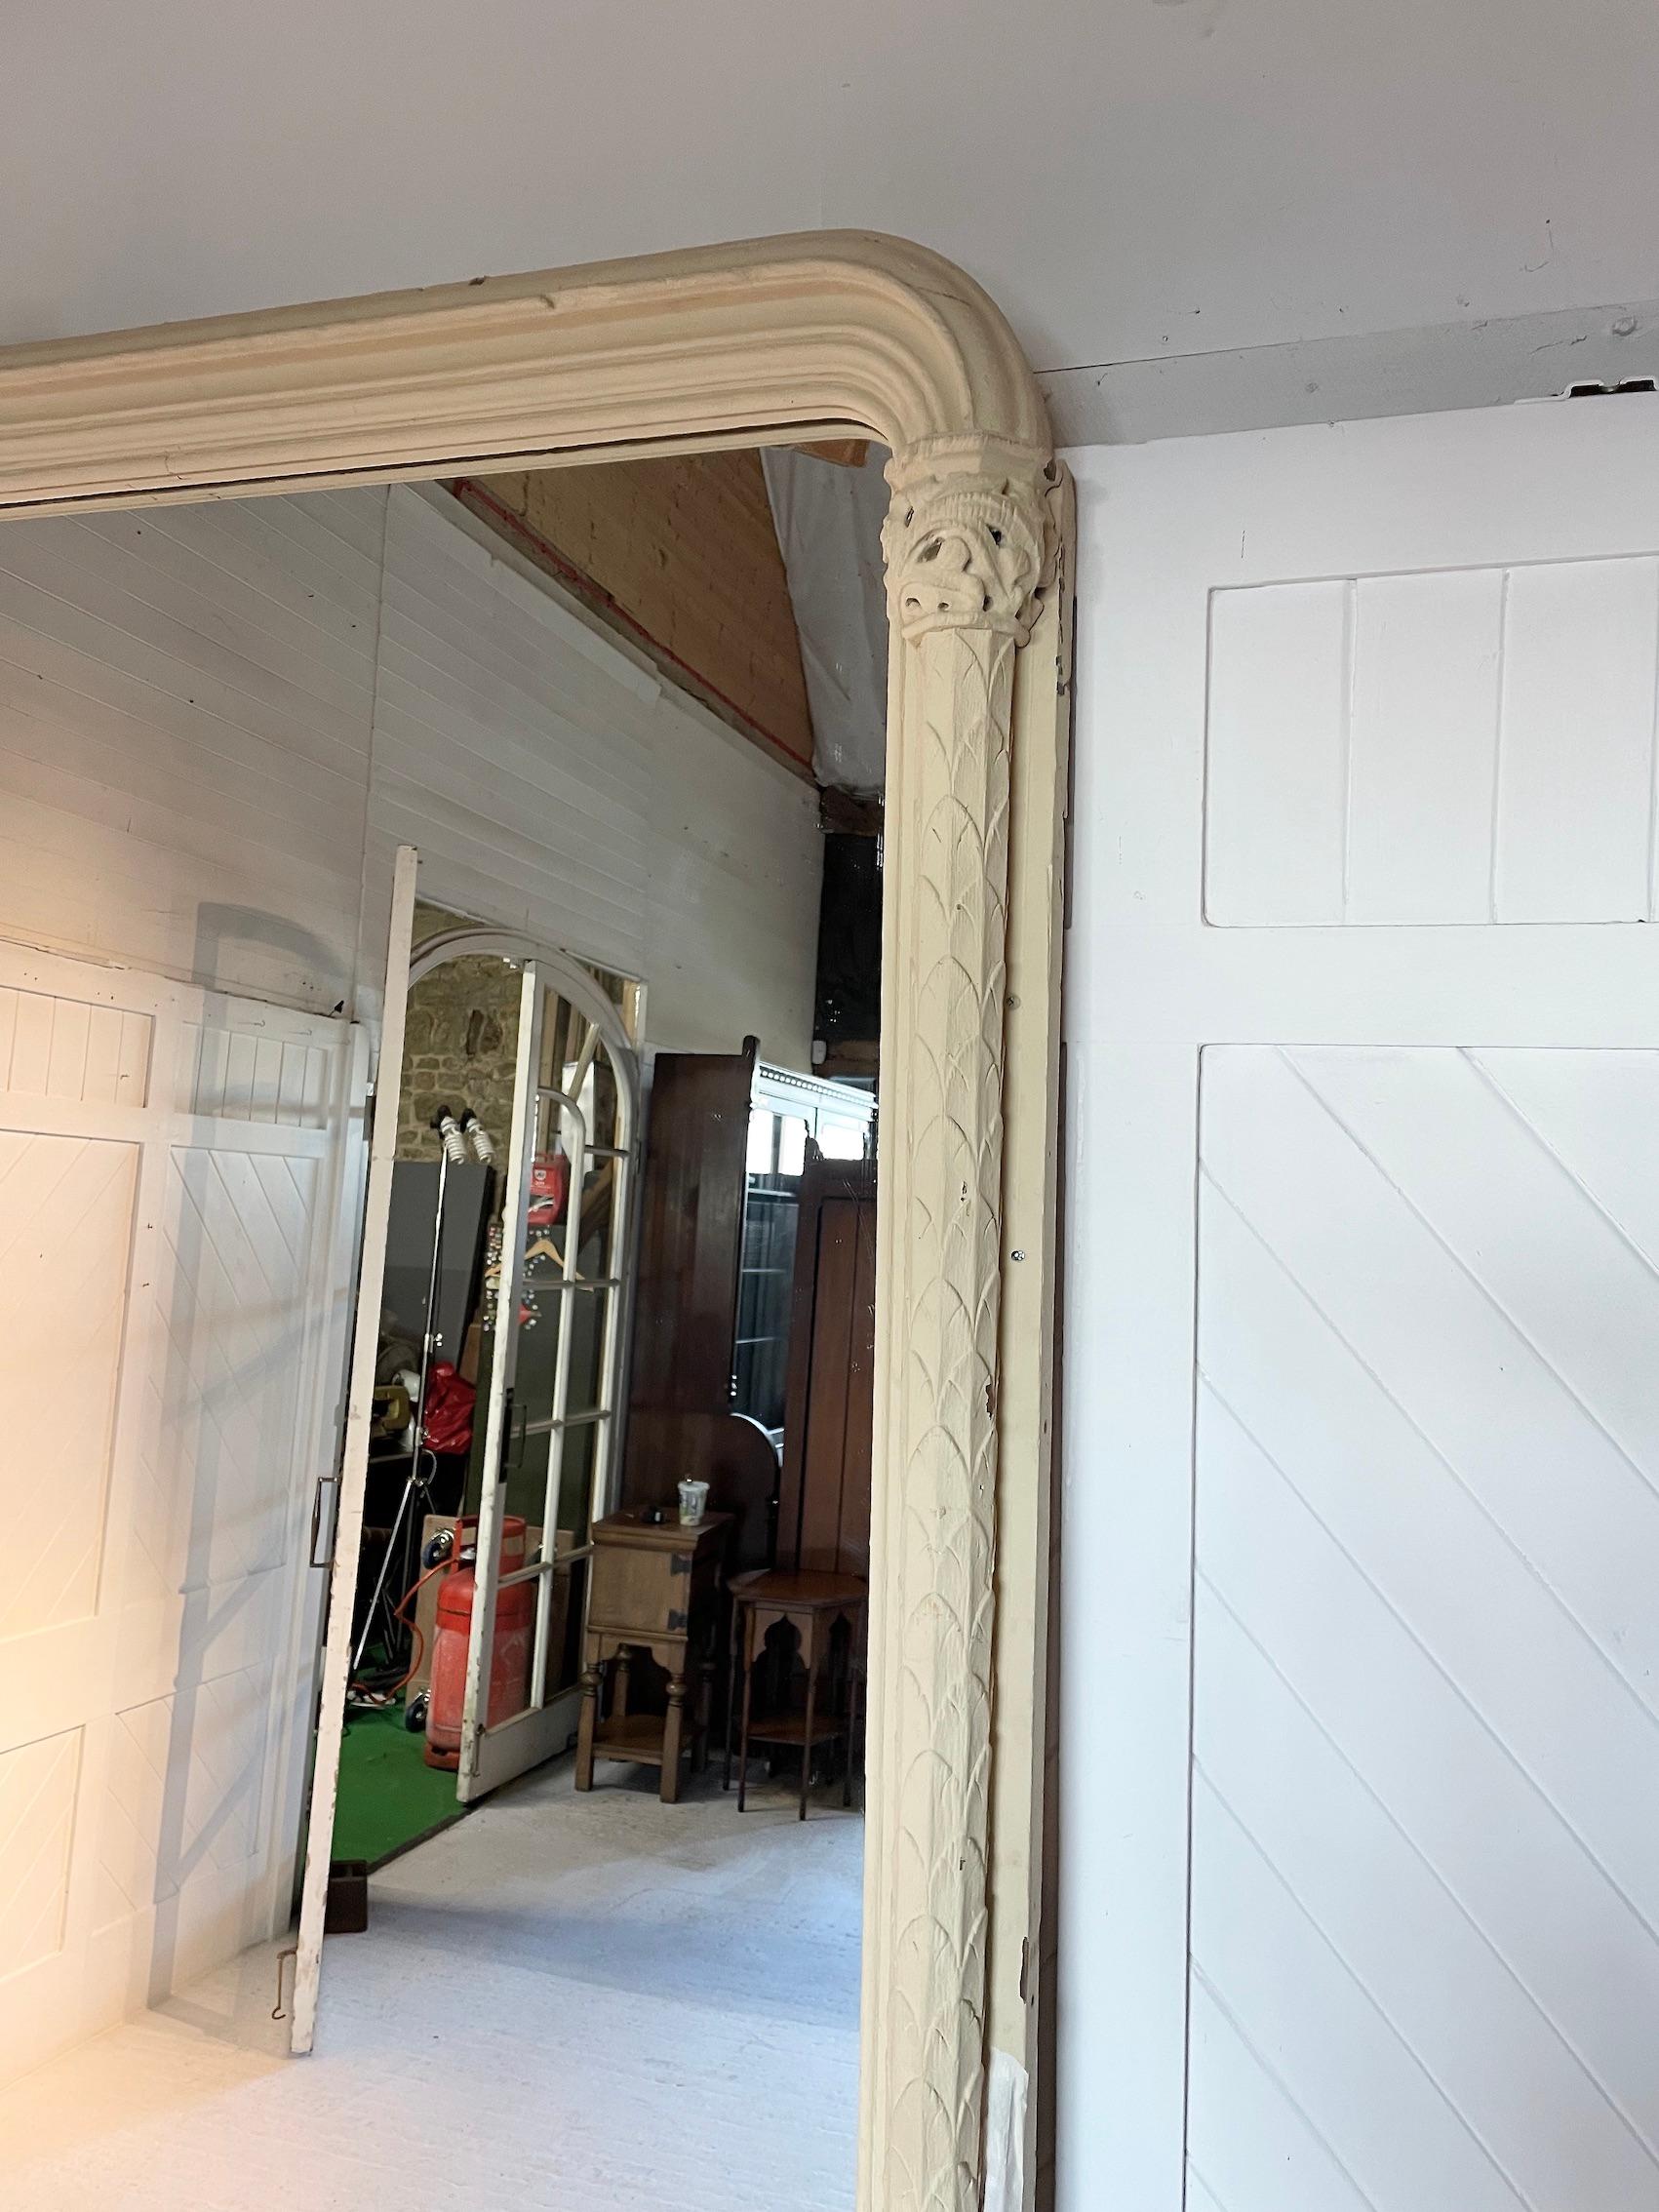 Absolutely stunning huge oak mirror
With Egyptian inspired leaf pattern design
In the manner of A.W.N. Pugin
In the Gothic Revival style
circa 1860
This mirror has been overpainted and could be stripped back and gilded.